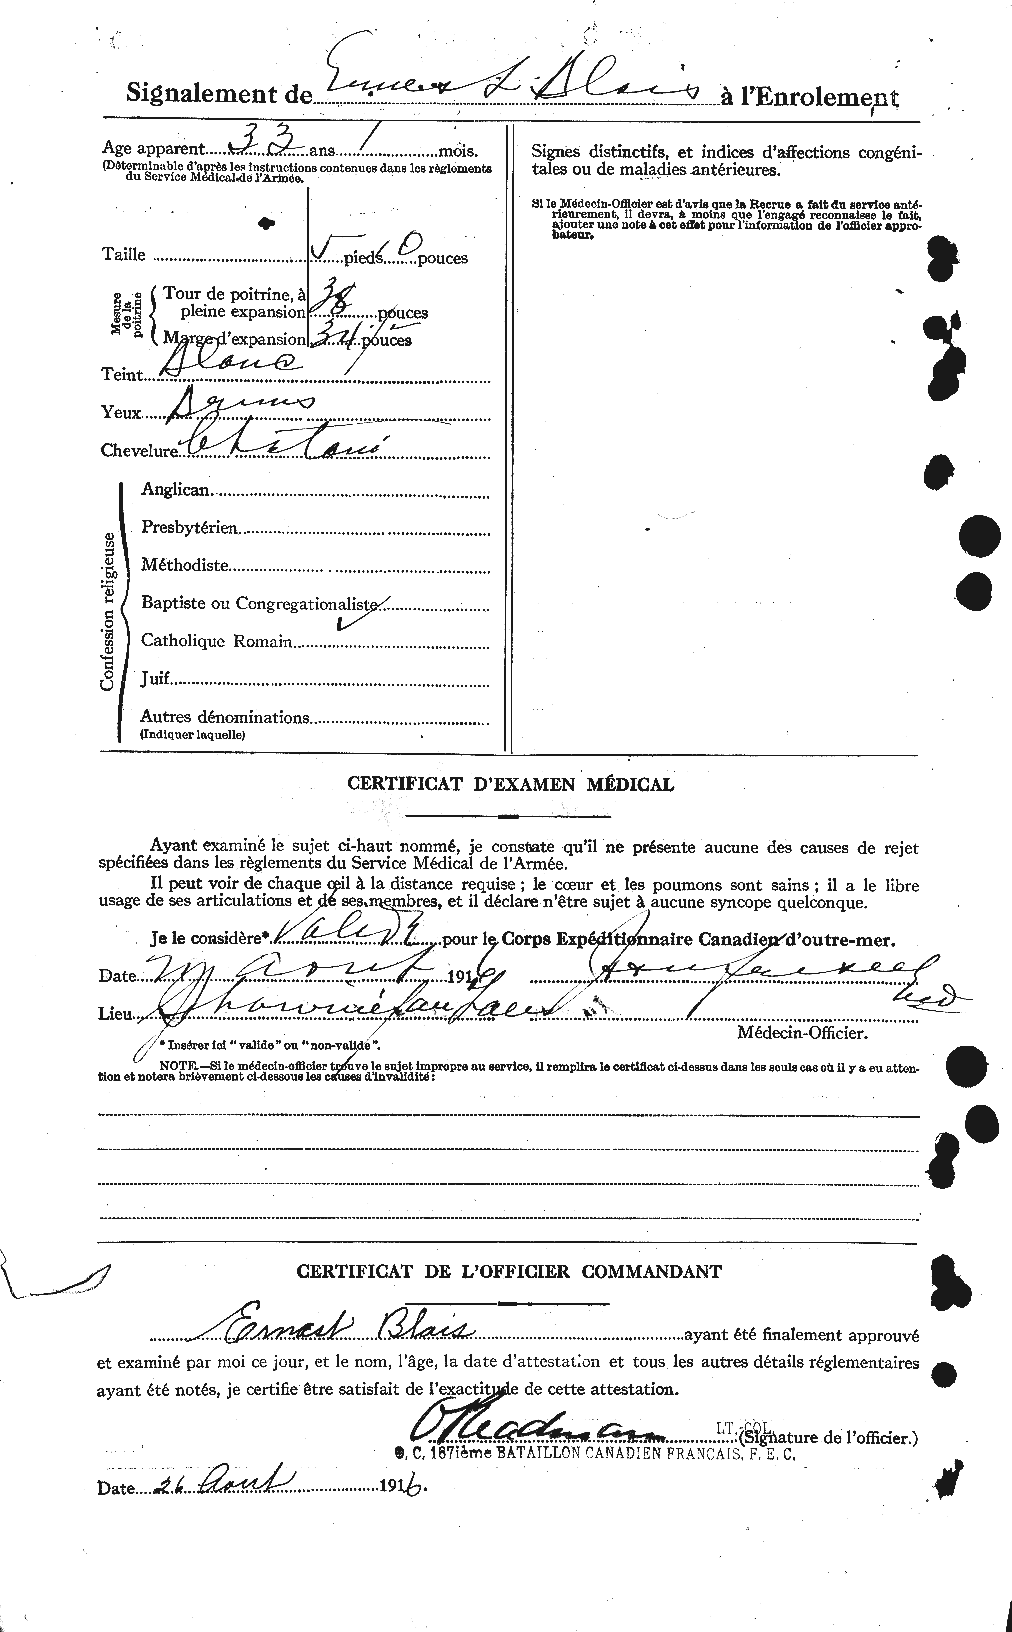 Personnel Records of the First World War - CEF 245411b